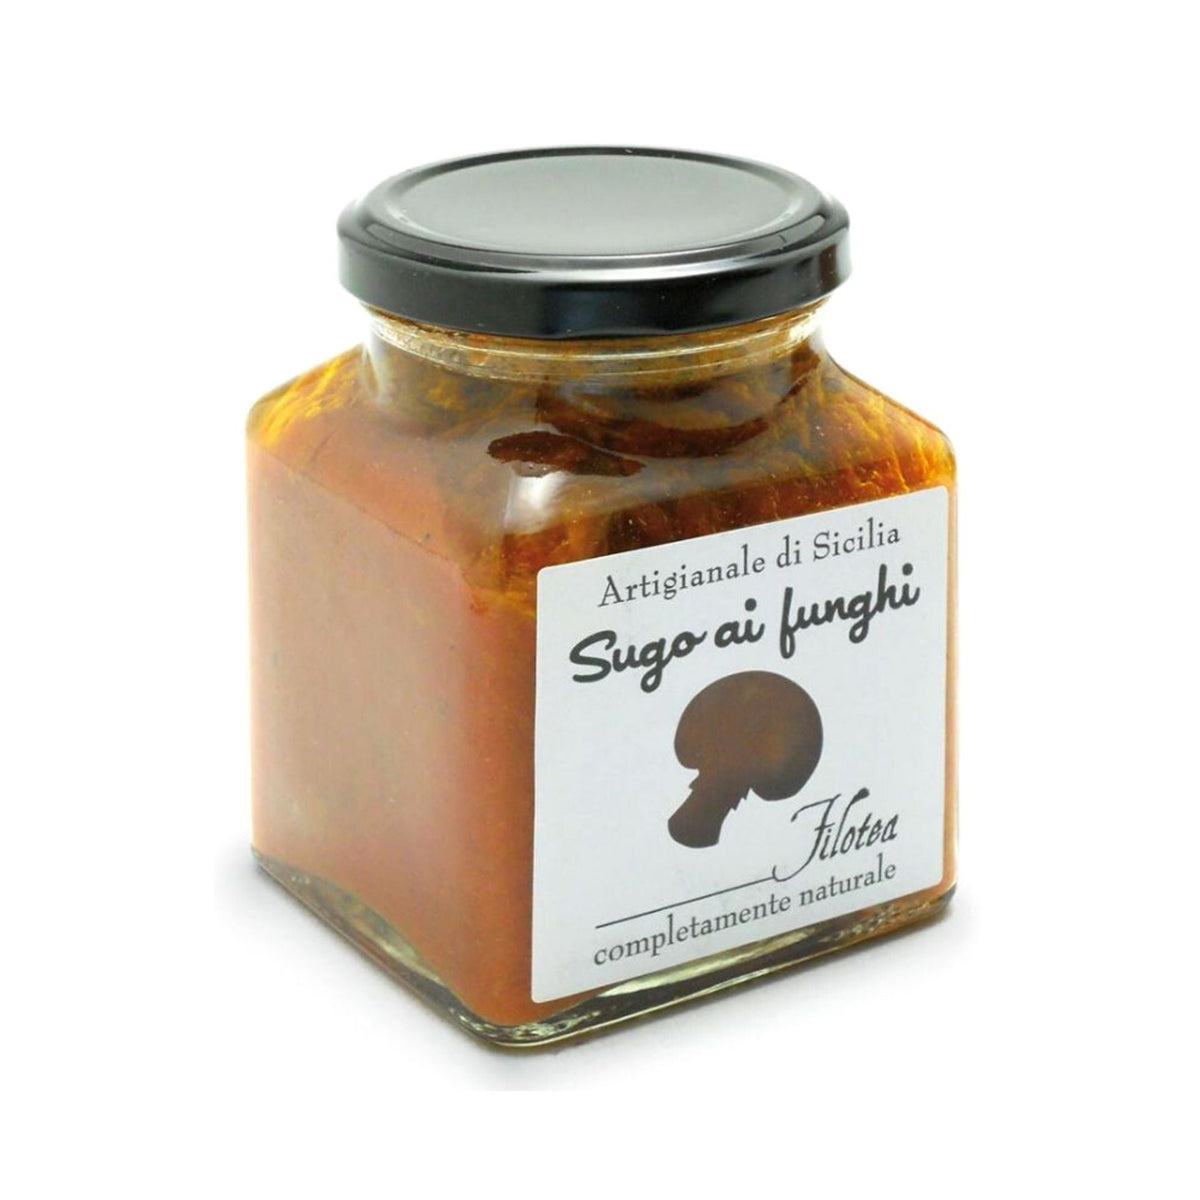 Filotea Mushroom Pasta Sauce 280g  | Imported and distributed in the UK by Just Gourmet Foods